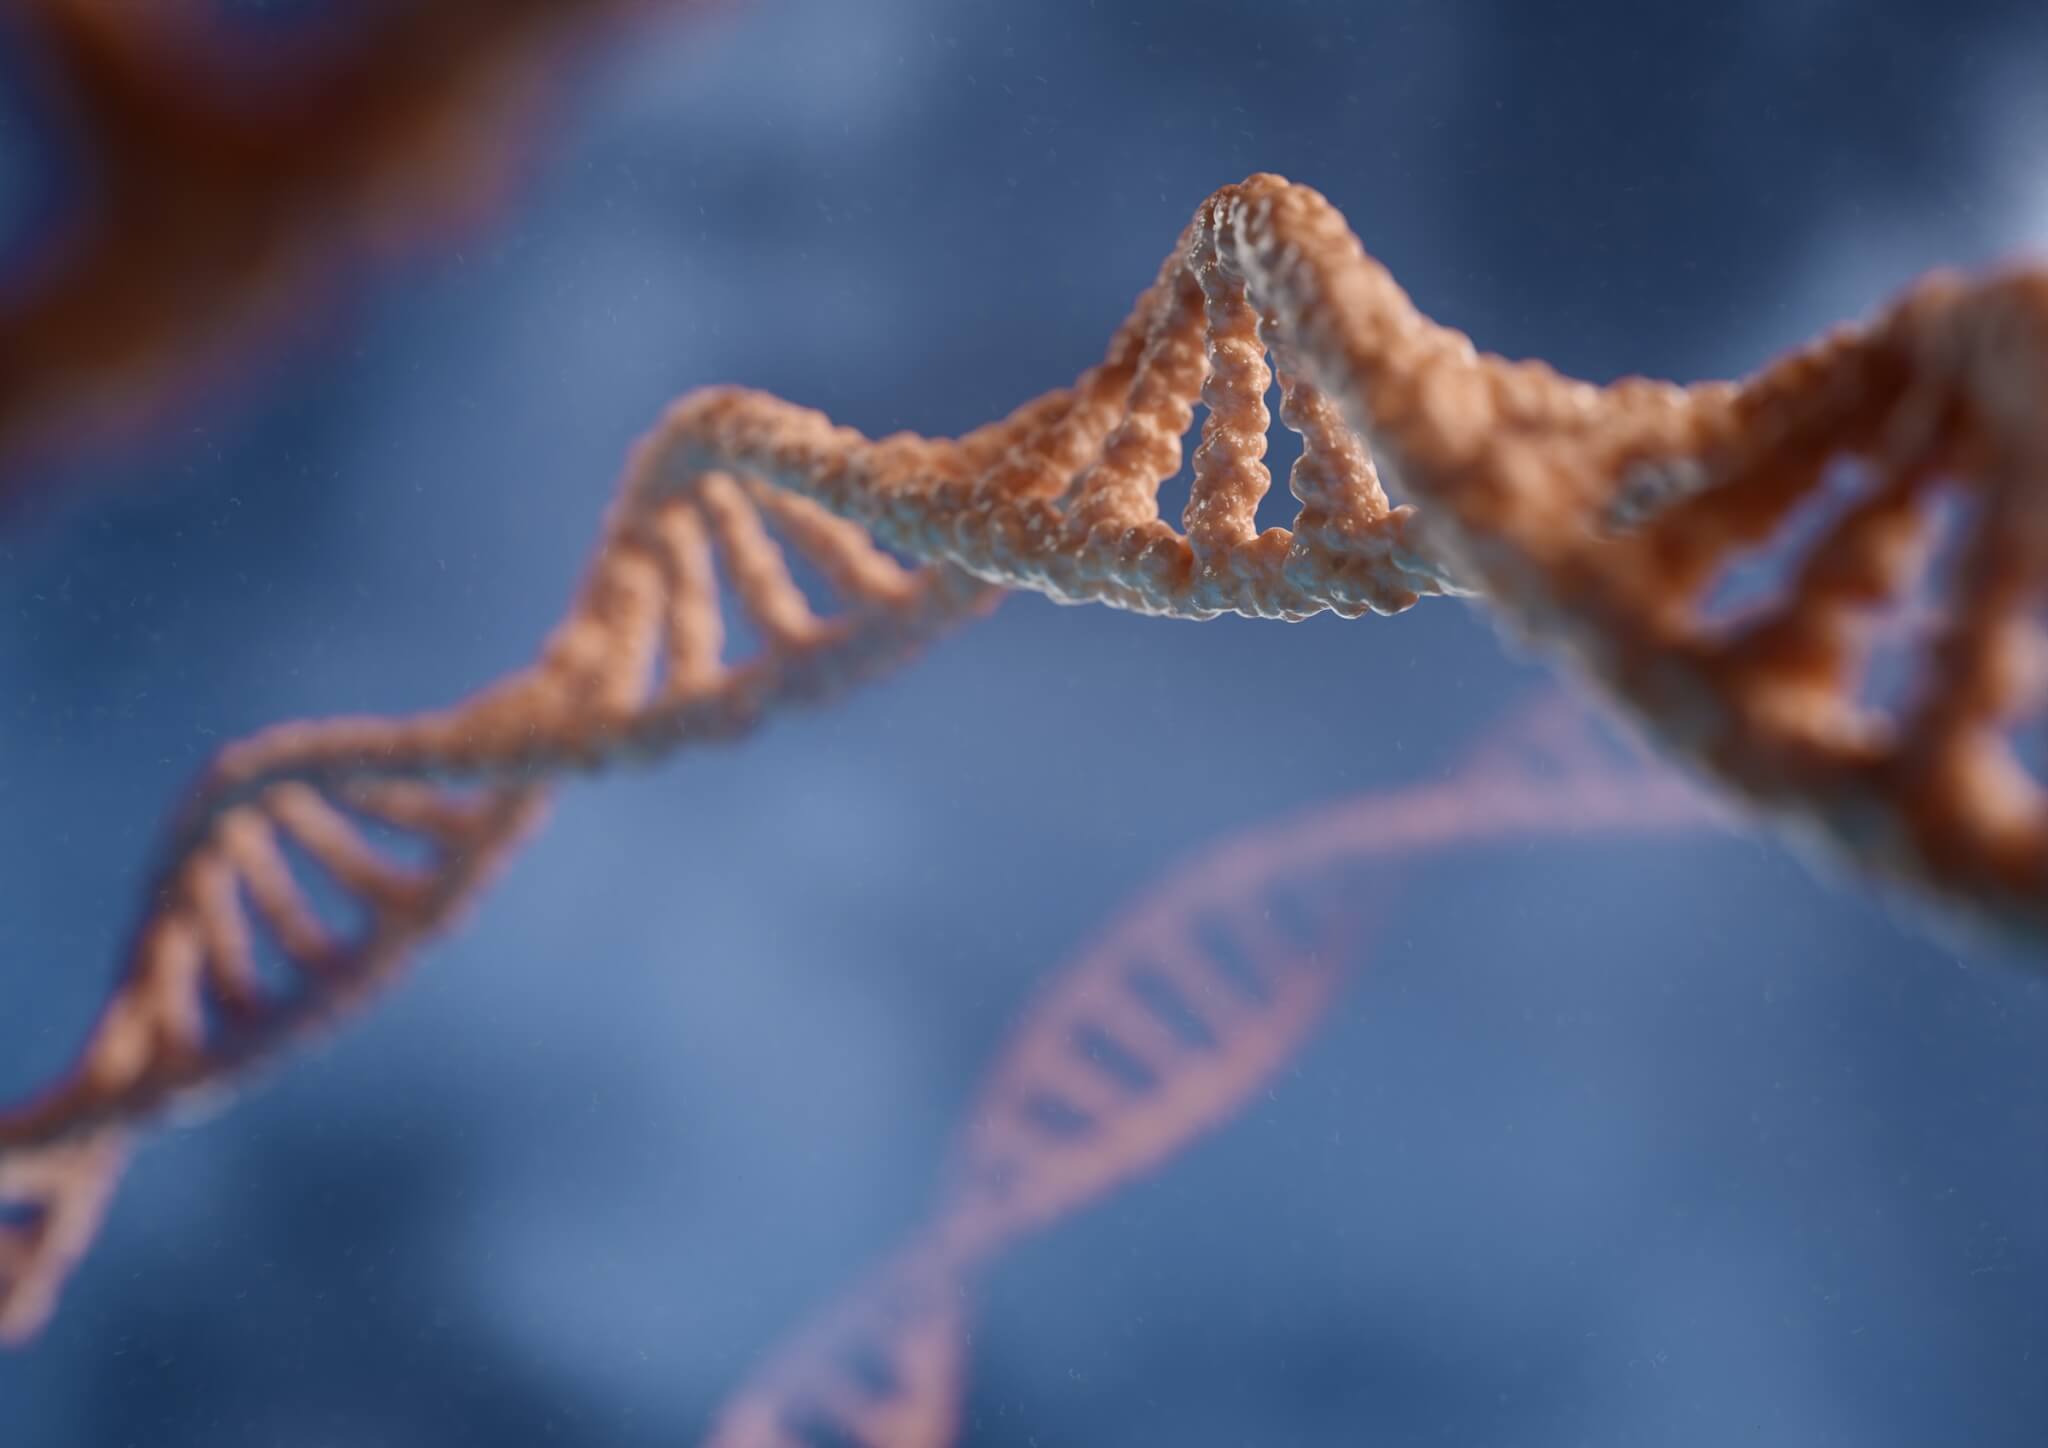 3D rendering capturing the double helix structure of DNA against a blue backdrop, highlighting the intricate beauty of life's genetic code